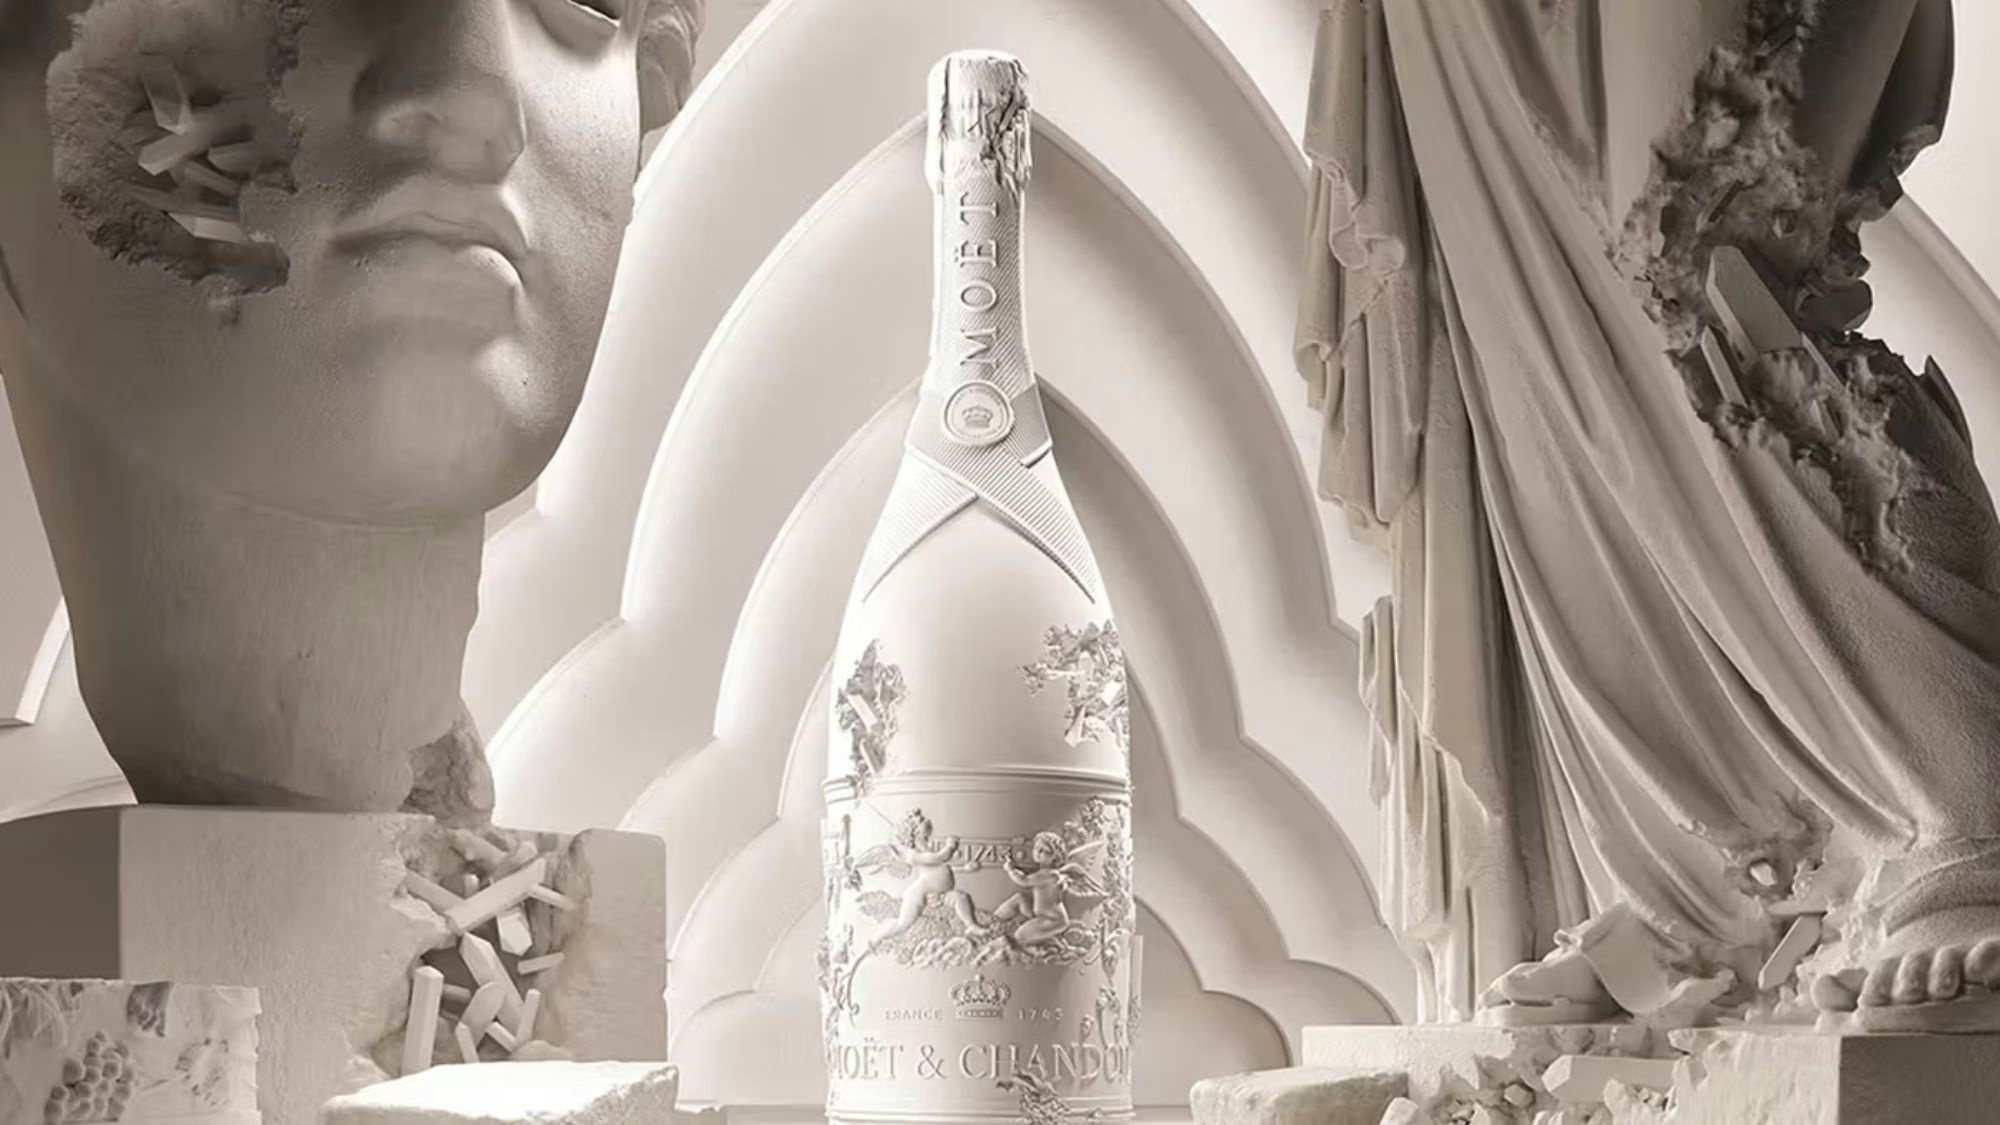 LVMH-owned Moët & Chandon understands how artist collaborations can amp up one's luxury reputation and cultural capital through collector's items. Photo: Moët & Chandon